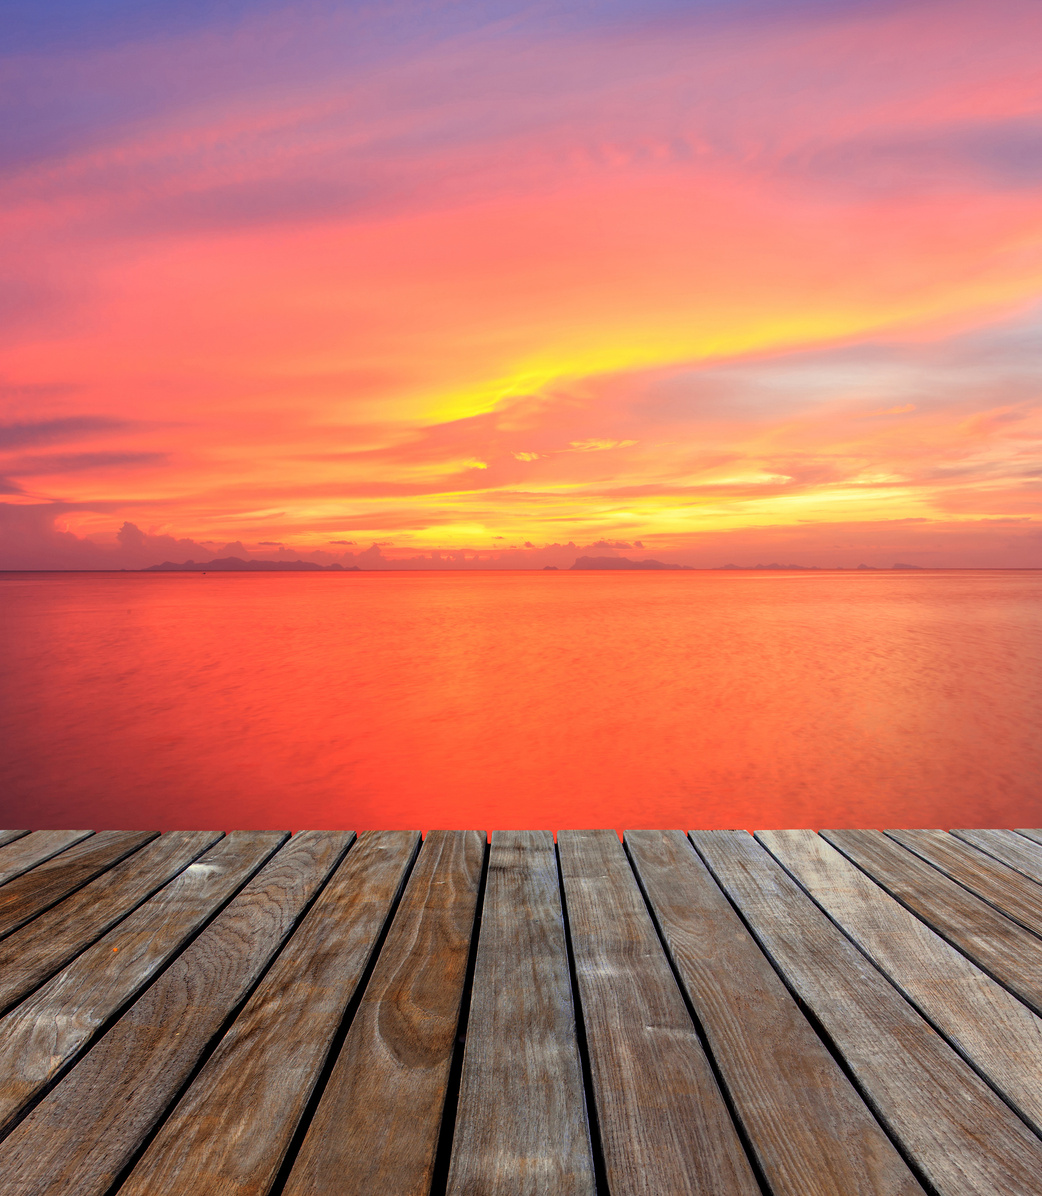 Wood decking and sunset